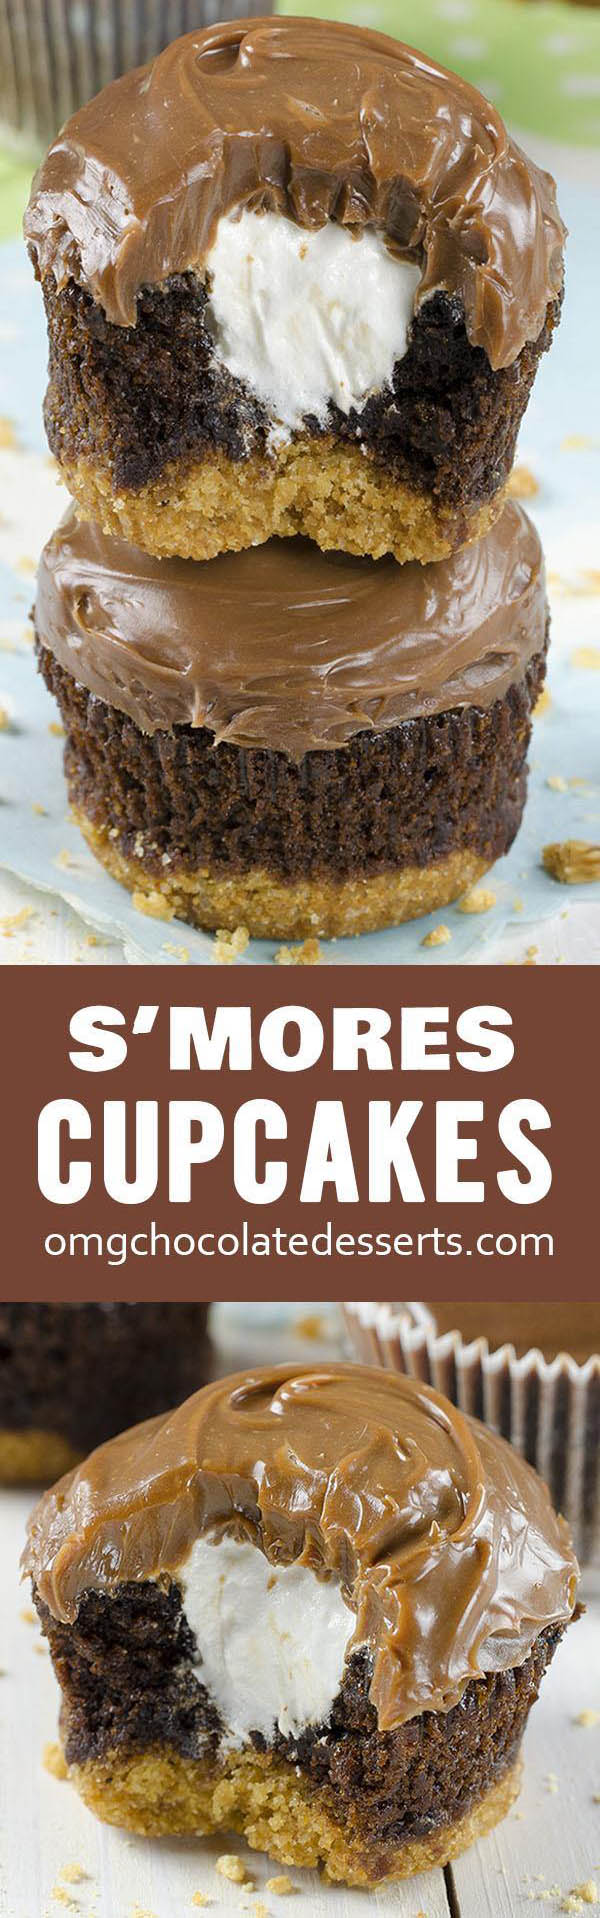 Hershey’s S’mores Cupcakes – delicious chocolate cupcakes with a graham cracker crust, filled with light and fluffy marshmallow filling and topped with milk chocolate ganache.